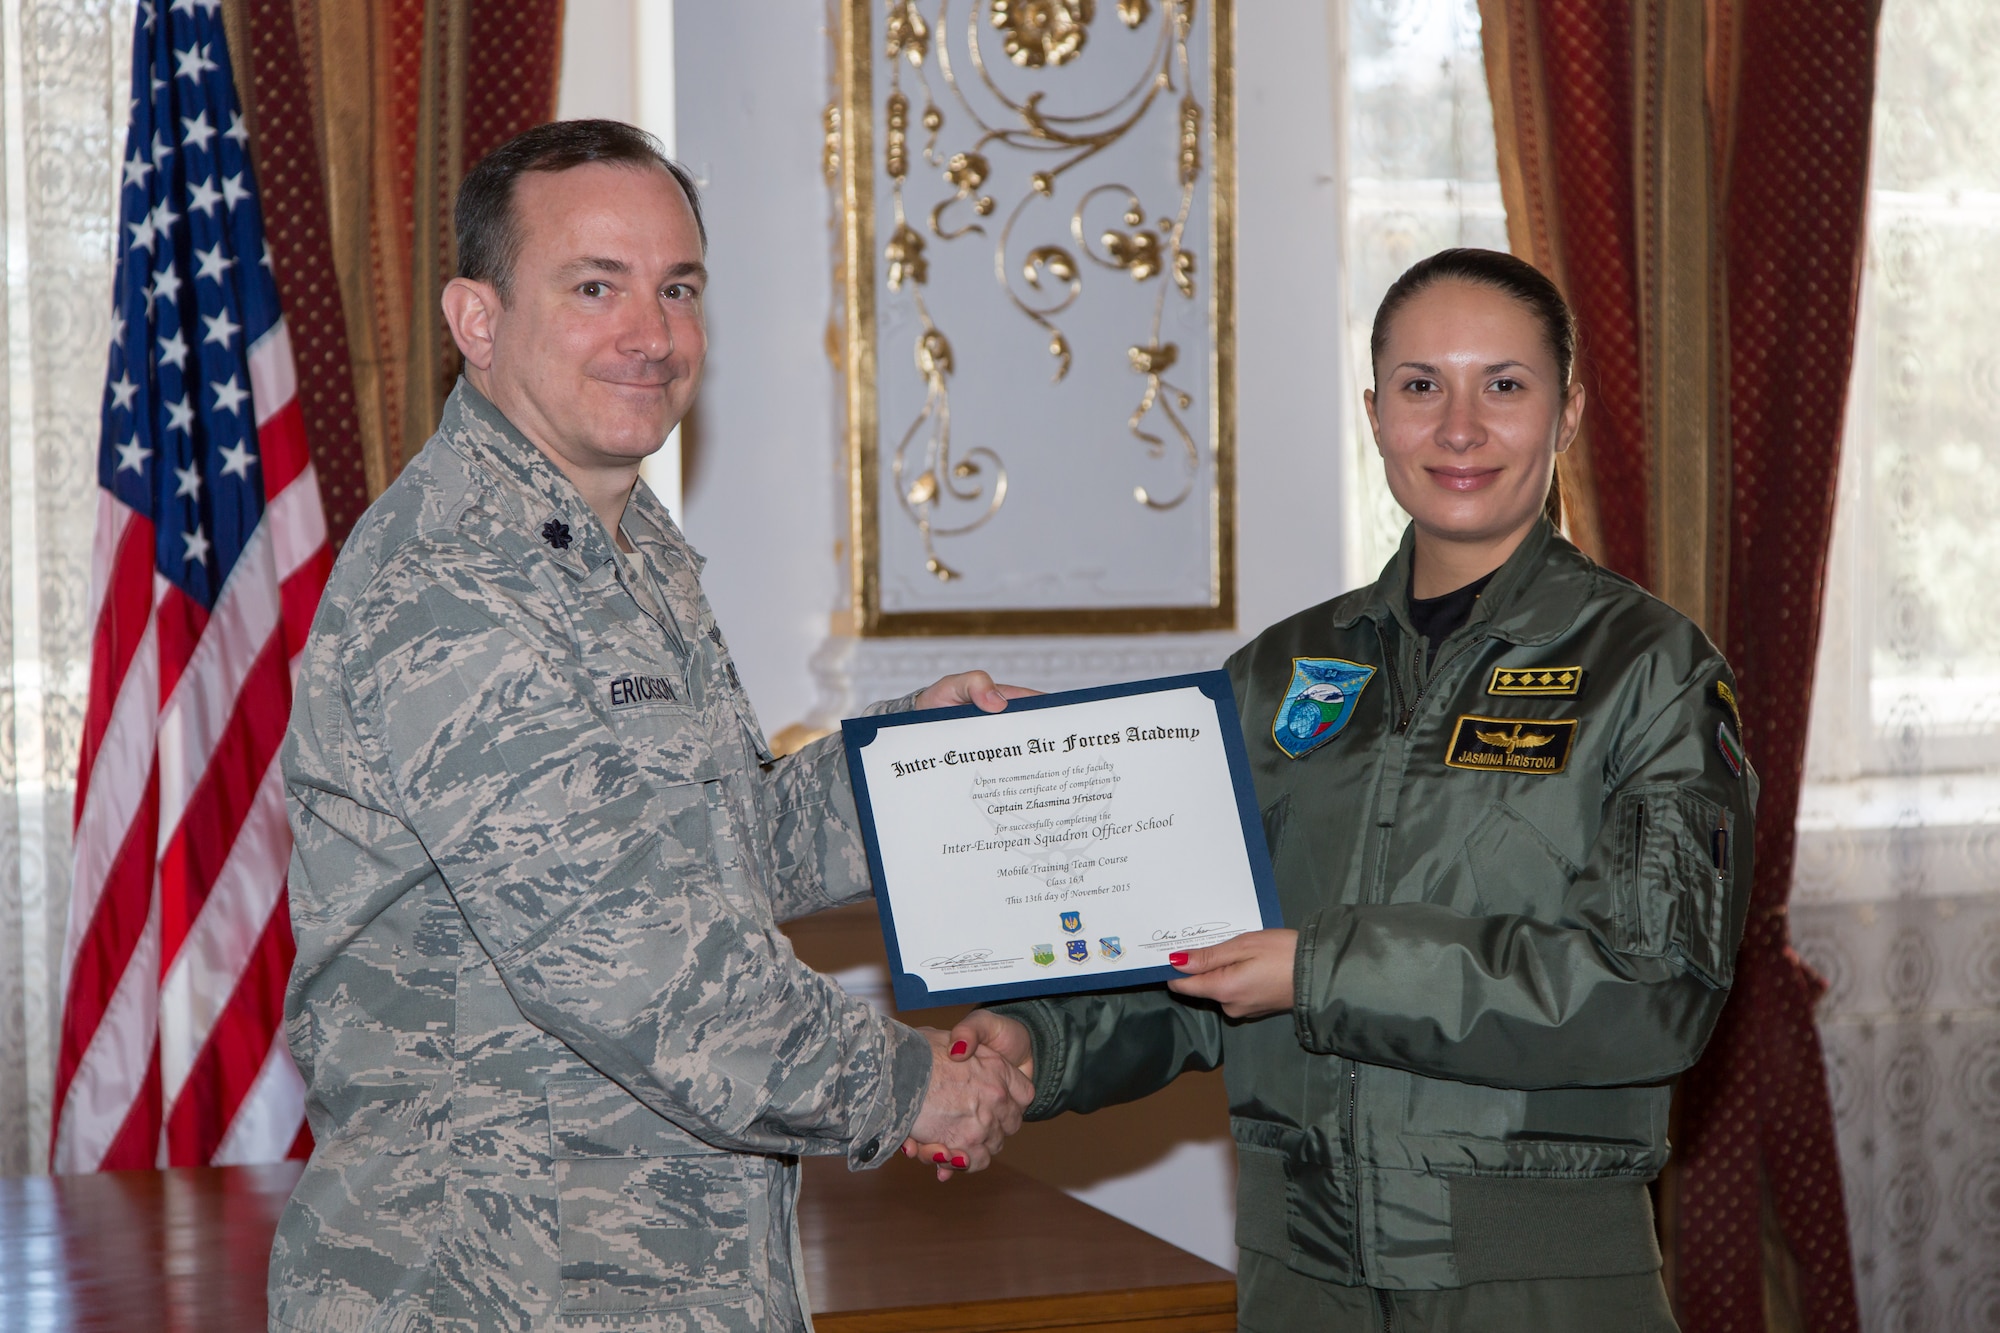 Lt. Col. Christopher Erickson, IEAFA Commandant, awards a certificate of completion to Captain Zhasmina Hristova, Bulgarian Air Force, during graduation of the first ever IEAFA combined international officer and NCO PME course graduation in Sofia, Bulgaria, Nov. 13, 2015. Twenty-three students from Bulgaria, Czech Republic, Estonia, and Hungary participated in this inagural course. (U.S. Air Force photo/SMSgt Travis Robbins/Released)